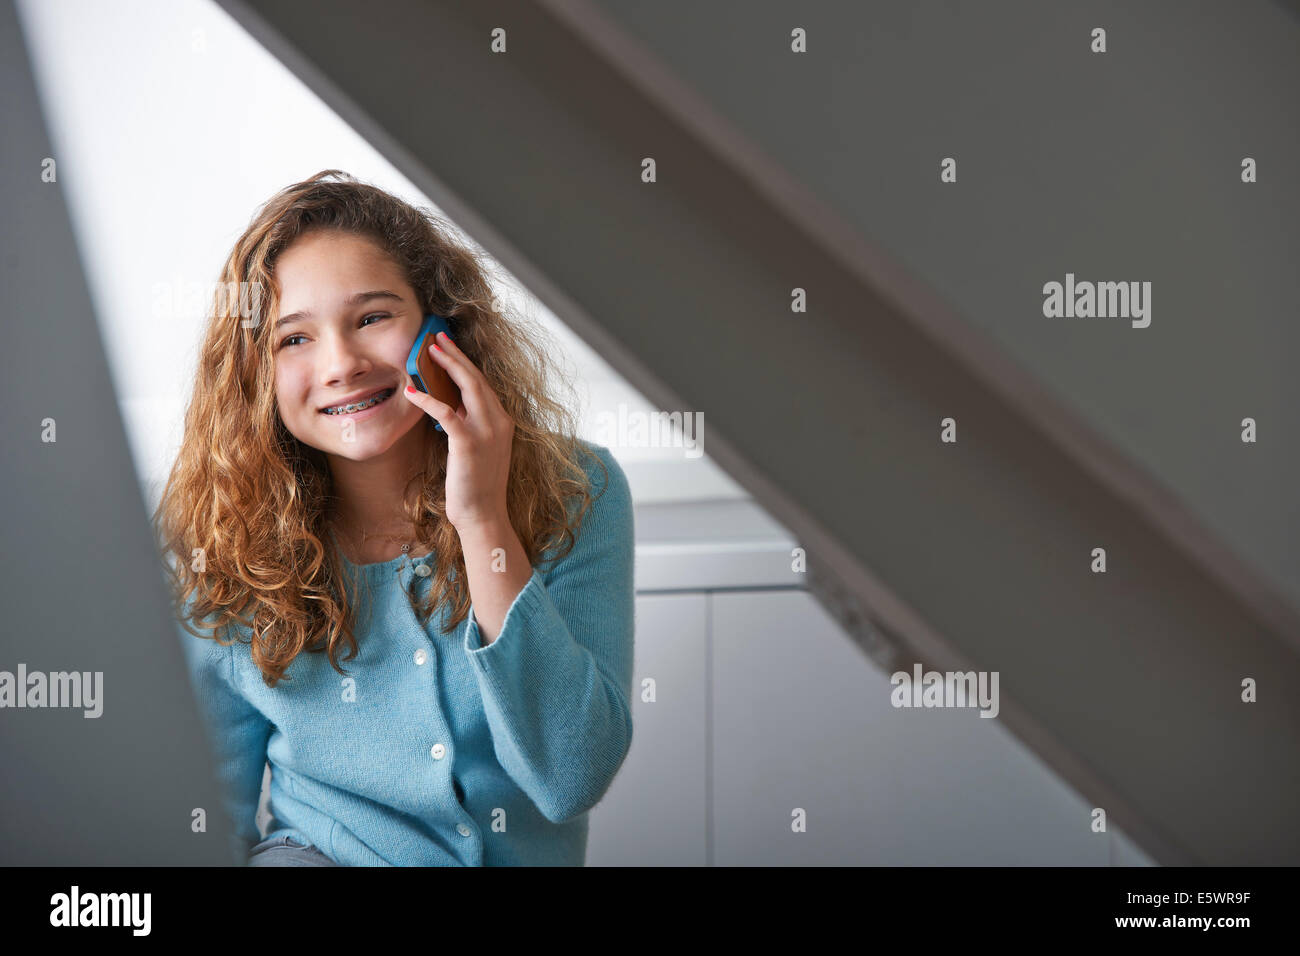 Young girl using mobile phone Stock Photo